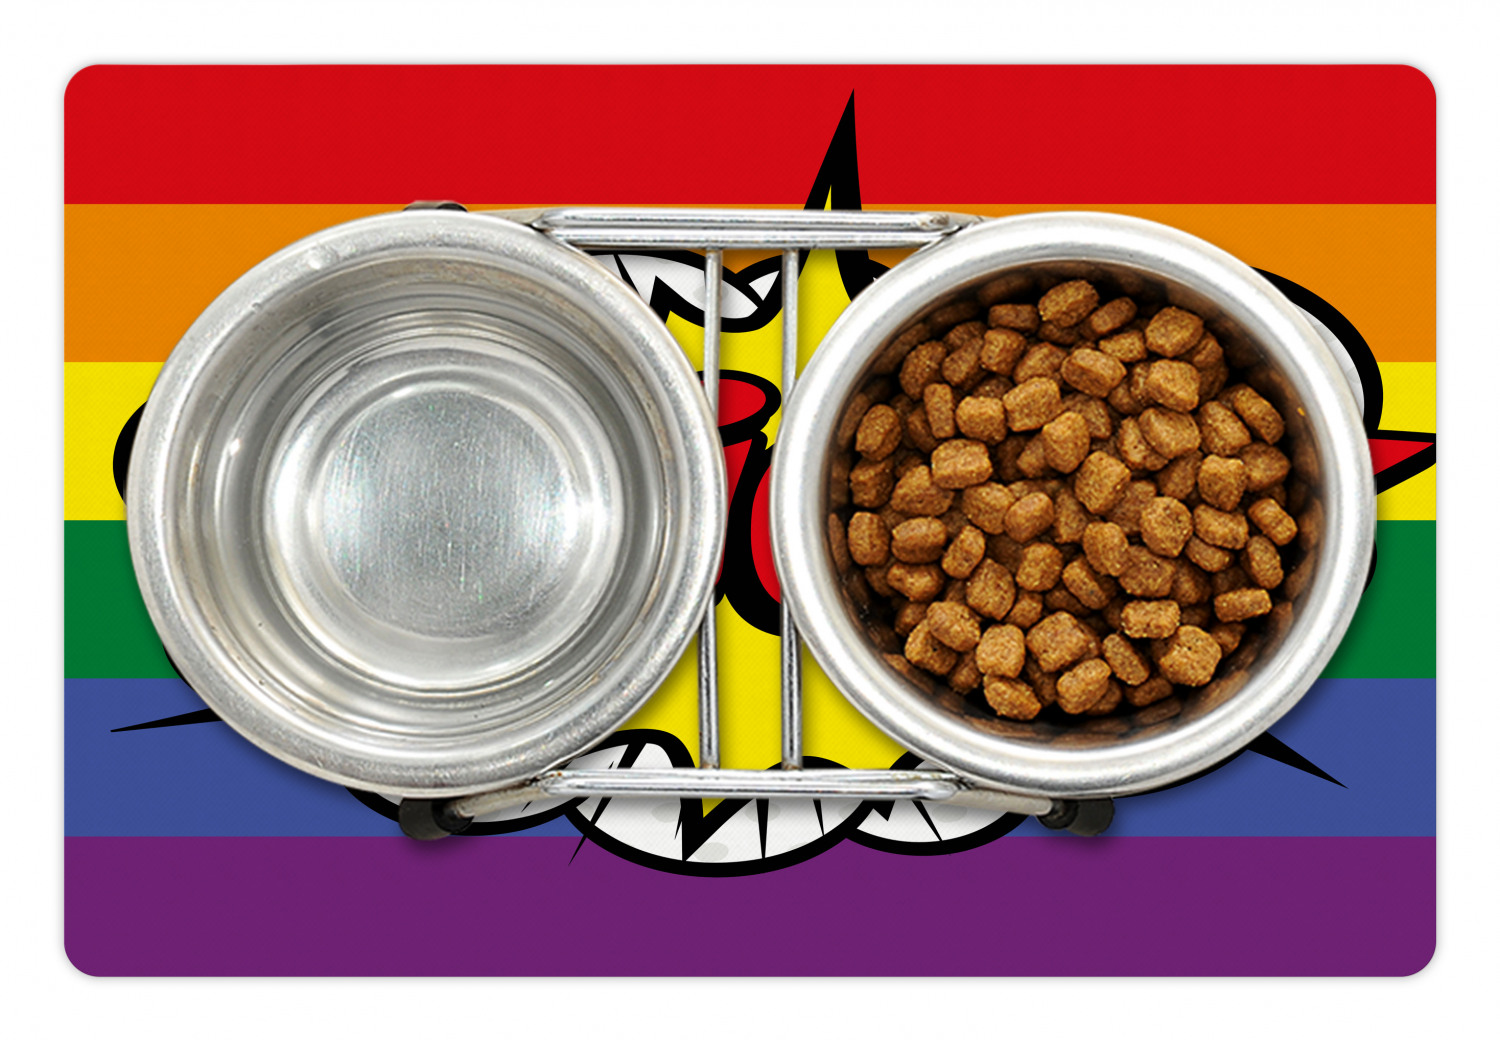 Pride Pet Mat for Food and Water, Pop Art Style Comic Book Pride Hand Lettering Effect and Rainbow Flag Image, Non-Slip Rubber Mat for Dogs and Cats, 18" X 12", by Ambesonne - image 1 of 2